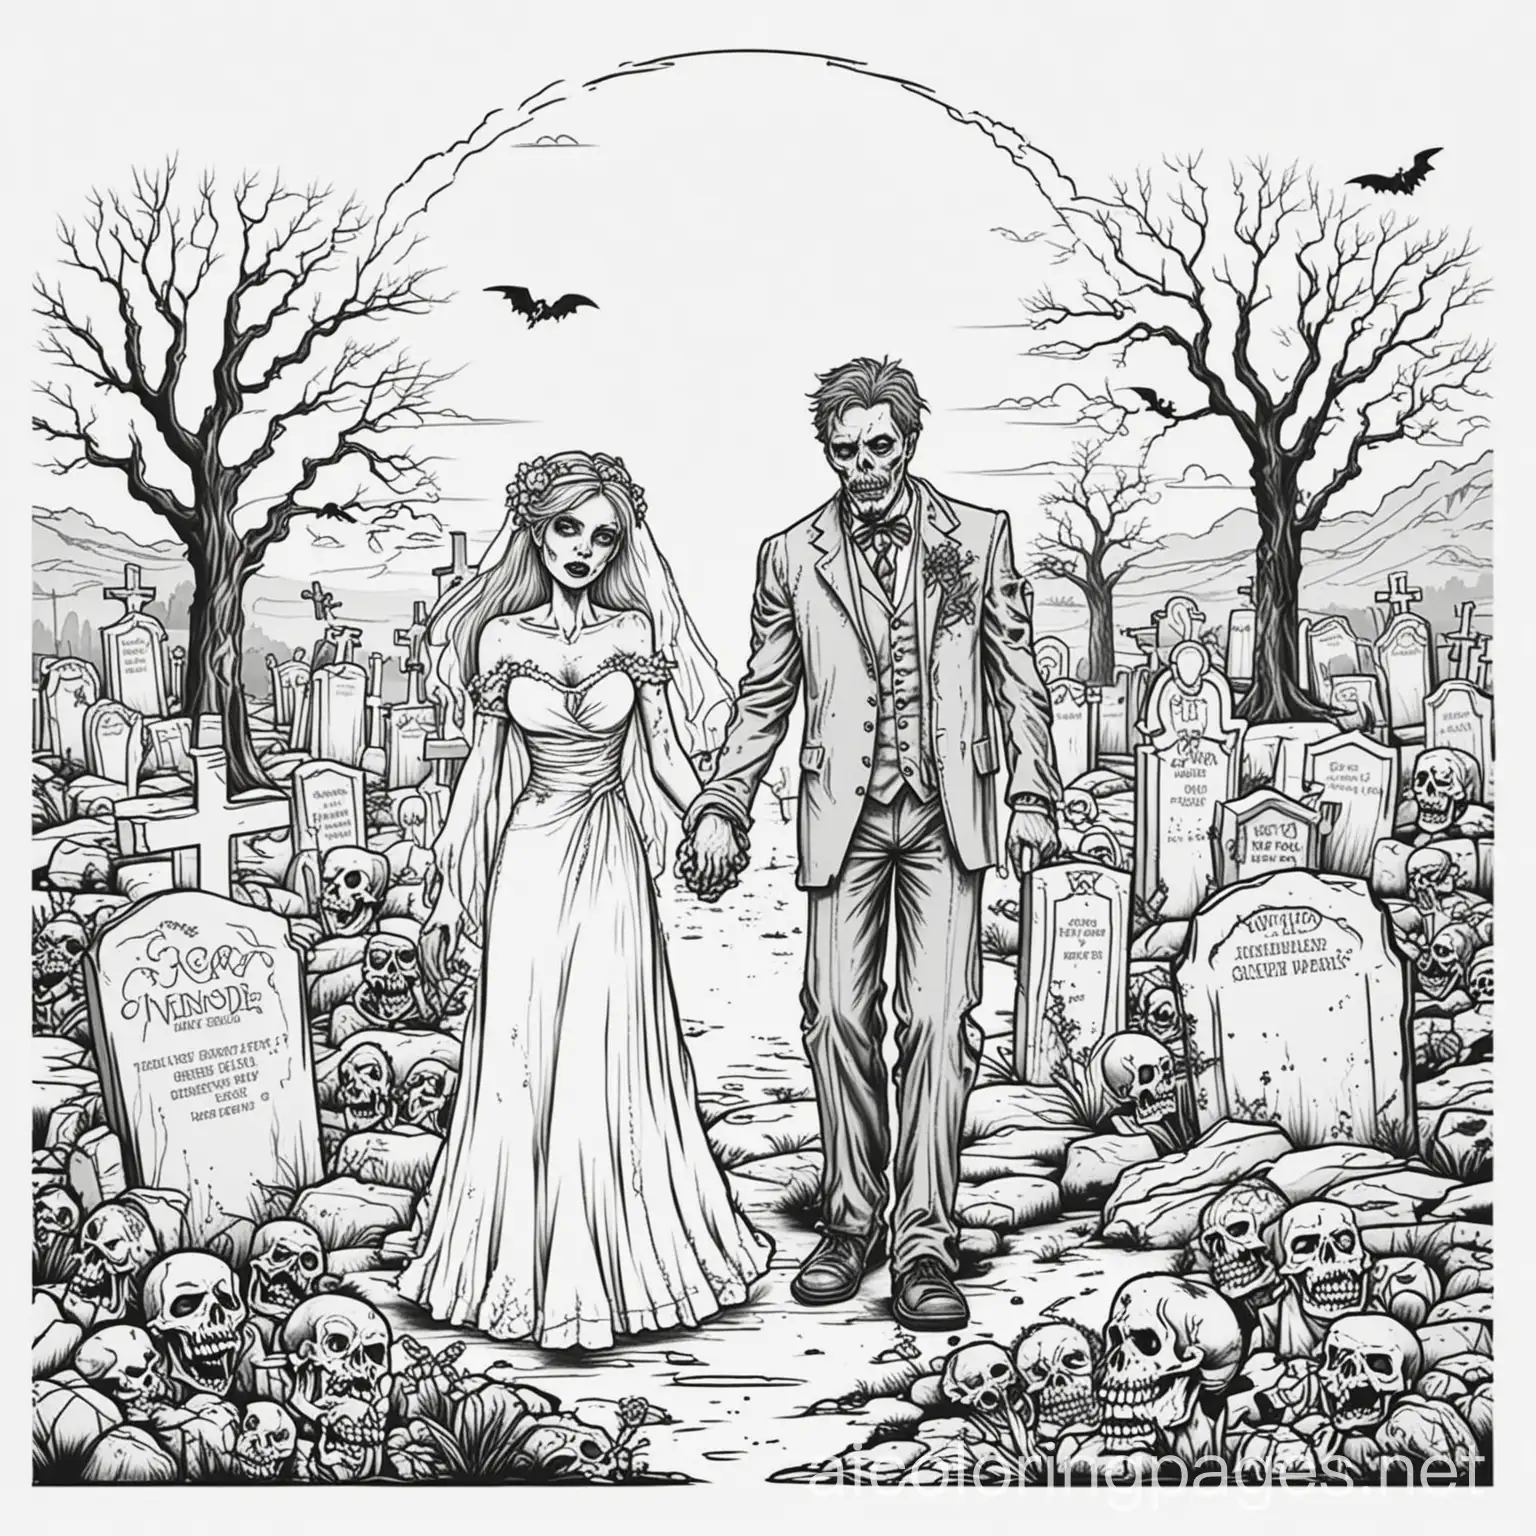 zombie graveyard wedding, Coloring Page, black and white, line art, white background, Simplicity, Ample White Space. The background of the coloring page is plain white to make it easy for young children to color within the lines. The outlines of all the subjects are easy to distinguish, making it simple for kids to color without too much difficulty